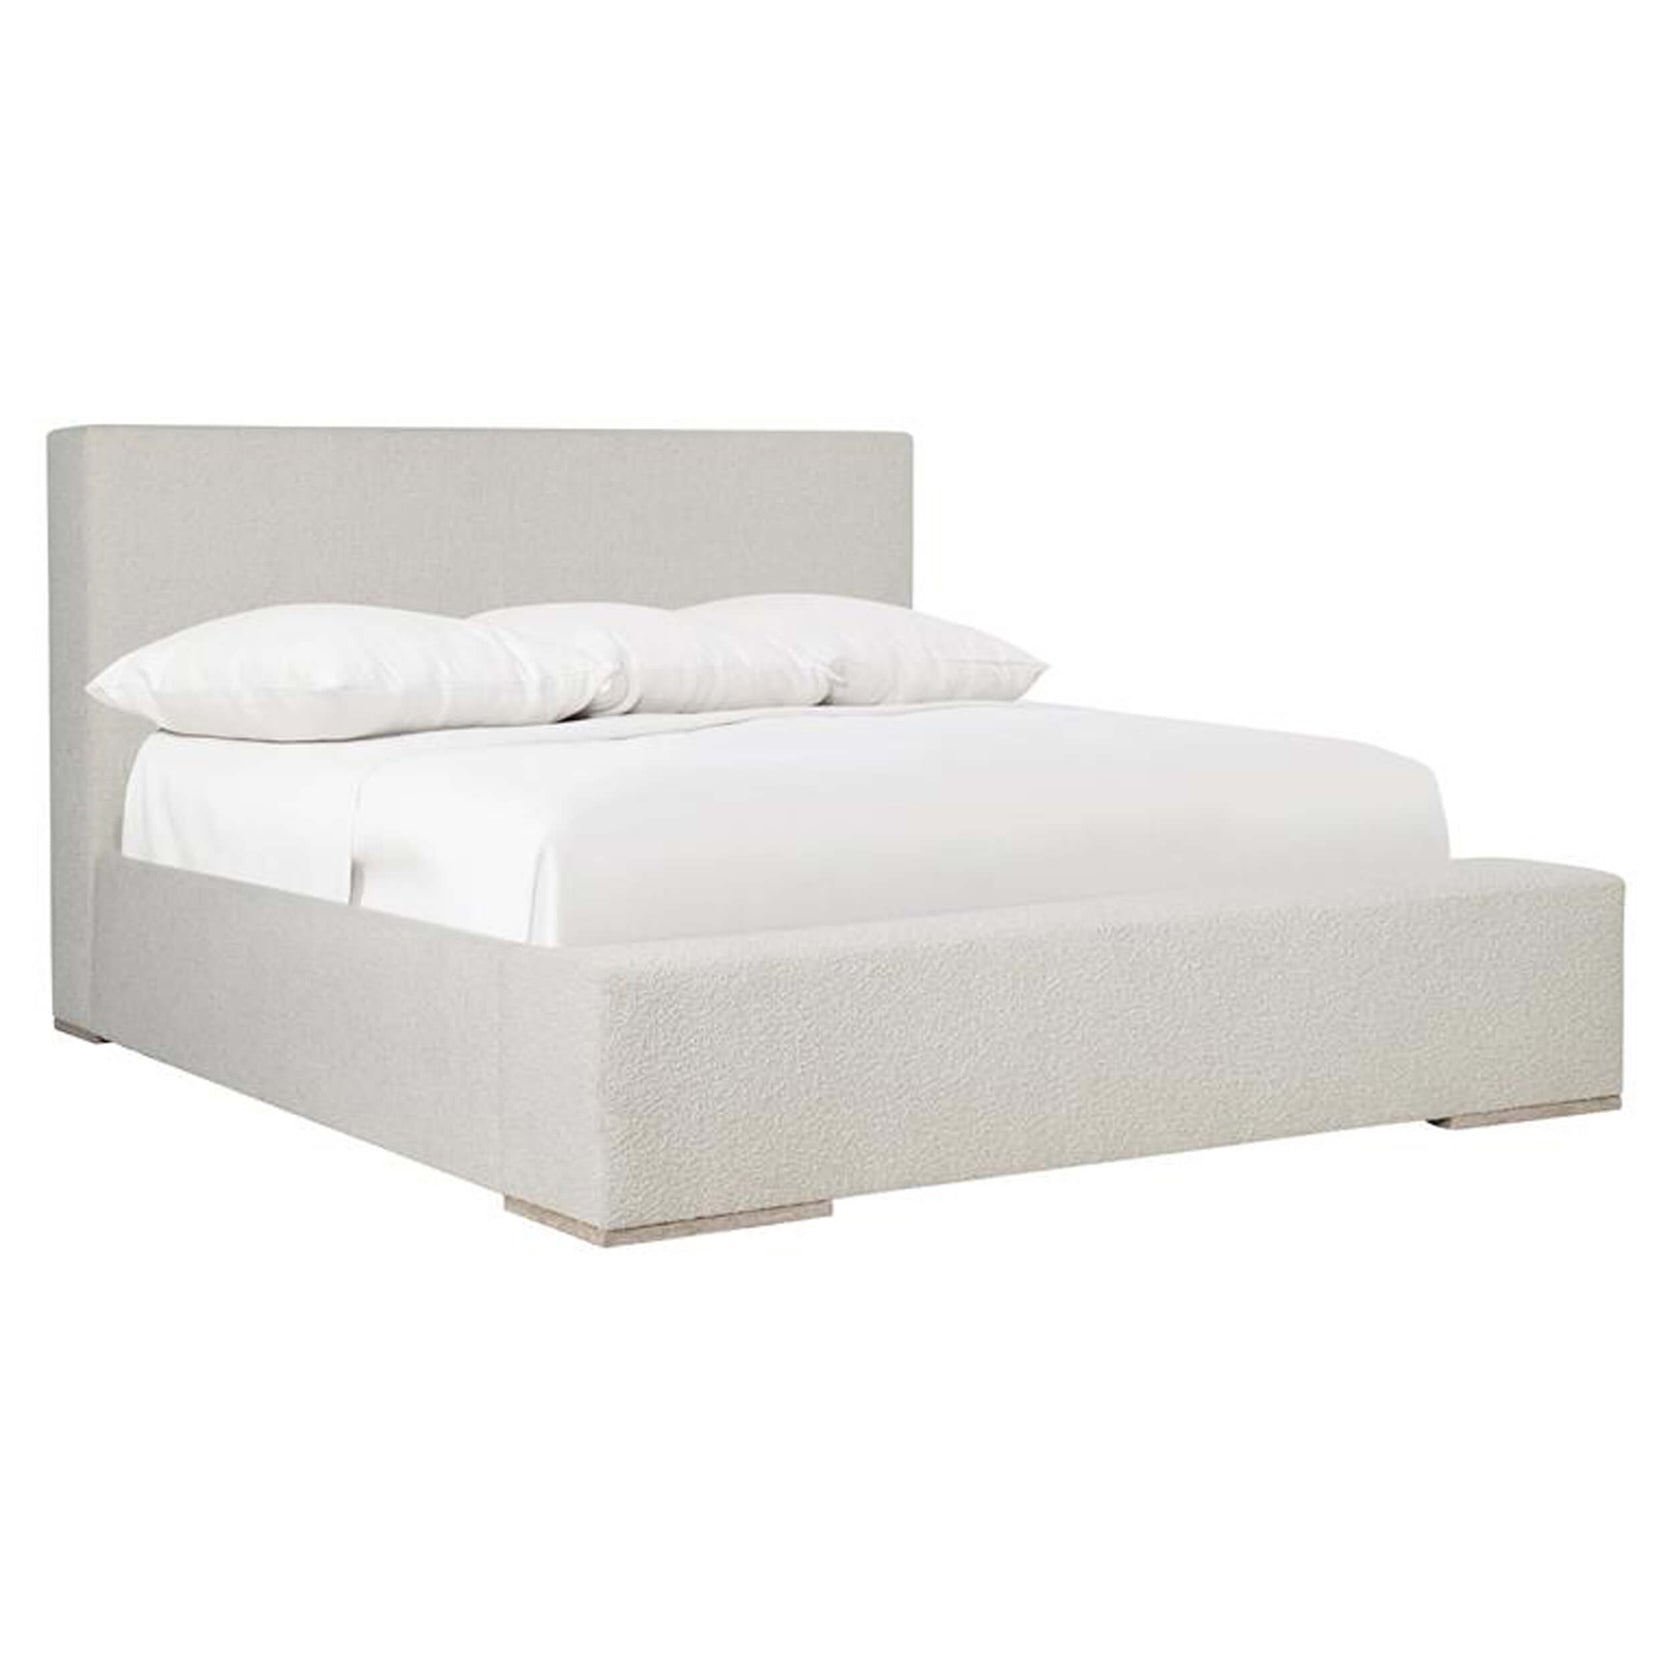 Image of Dunhill Bed